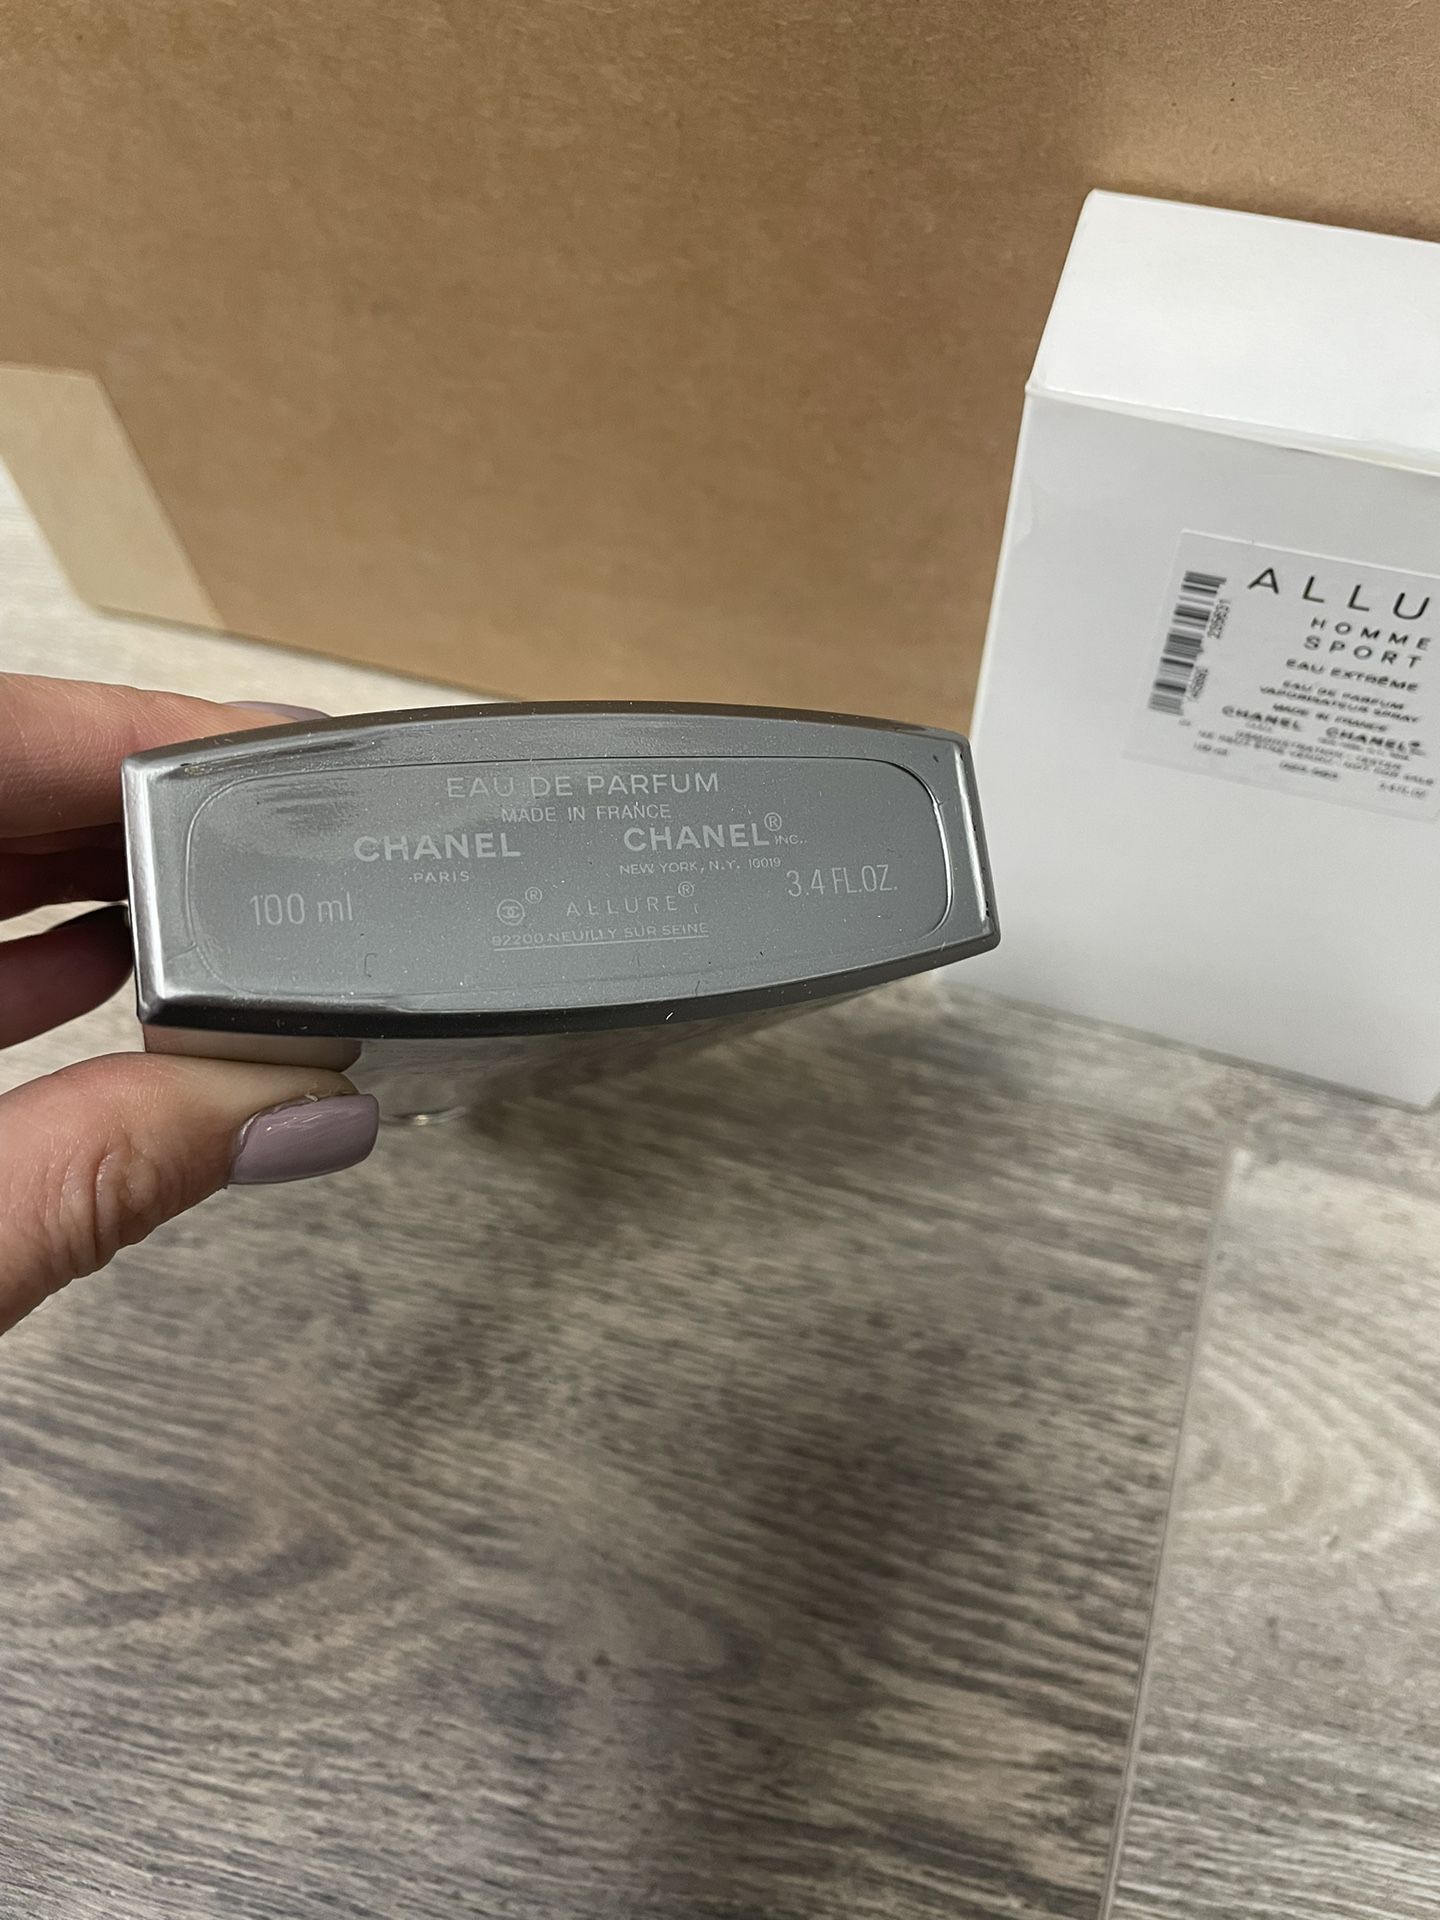 Chanel Allure Homme Sport tester (real or fake?)